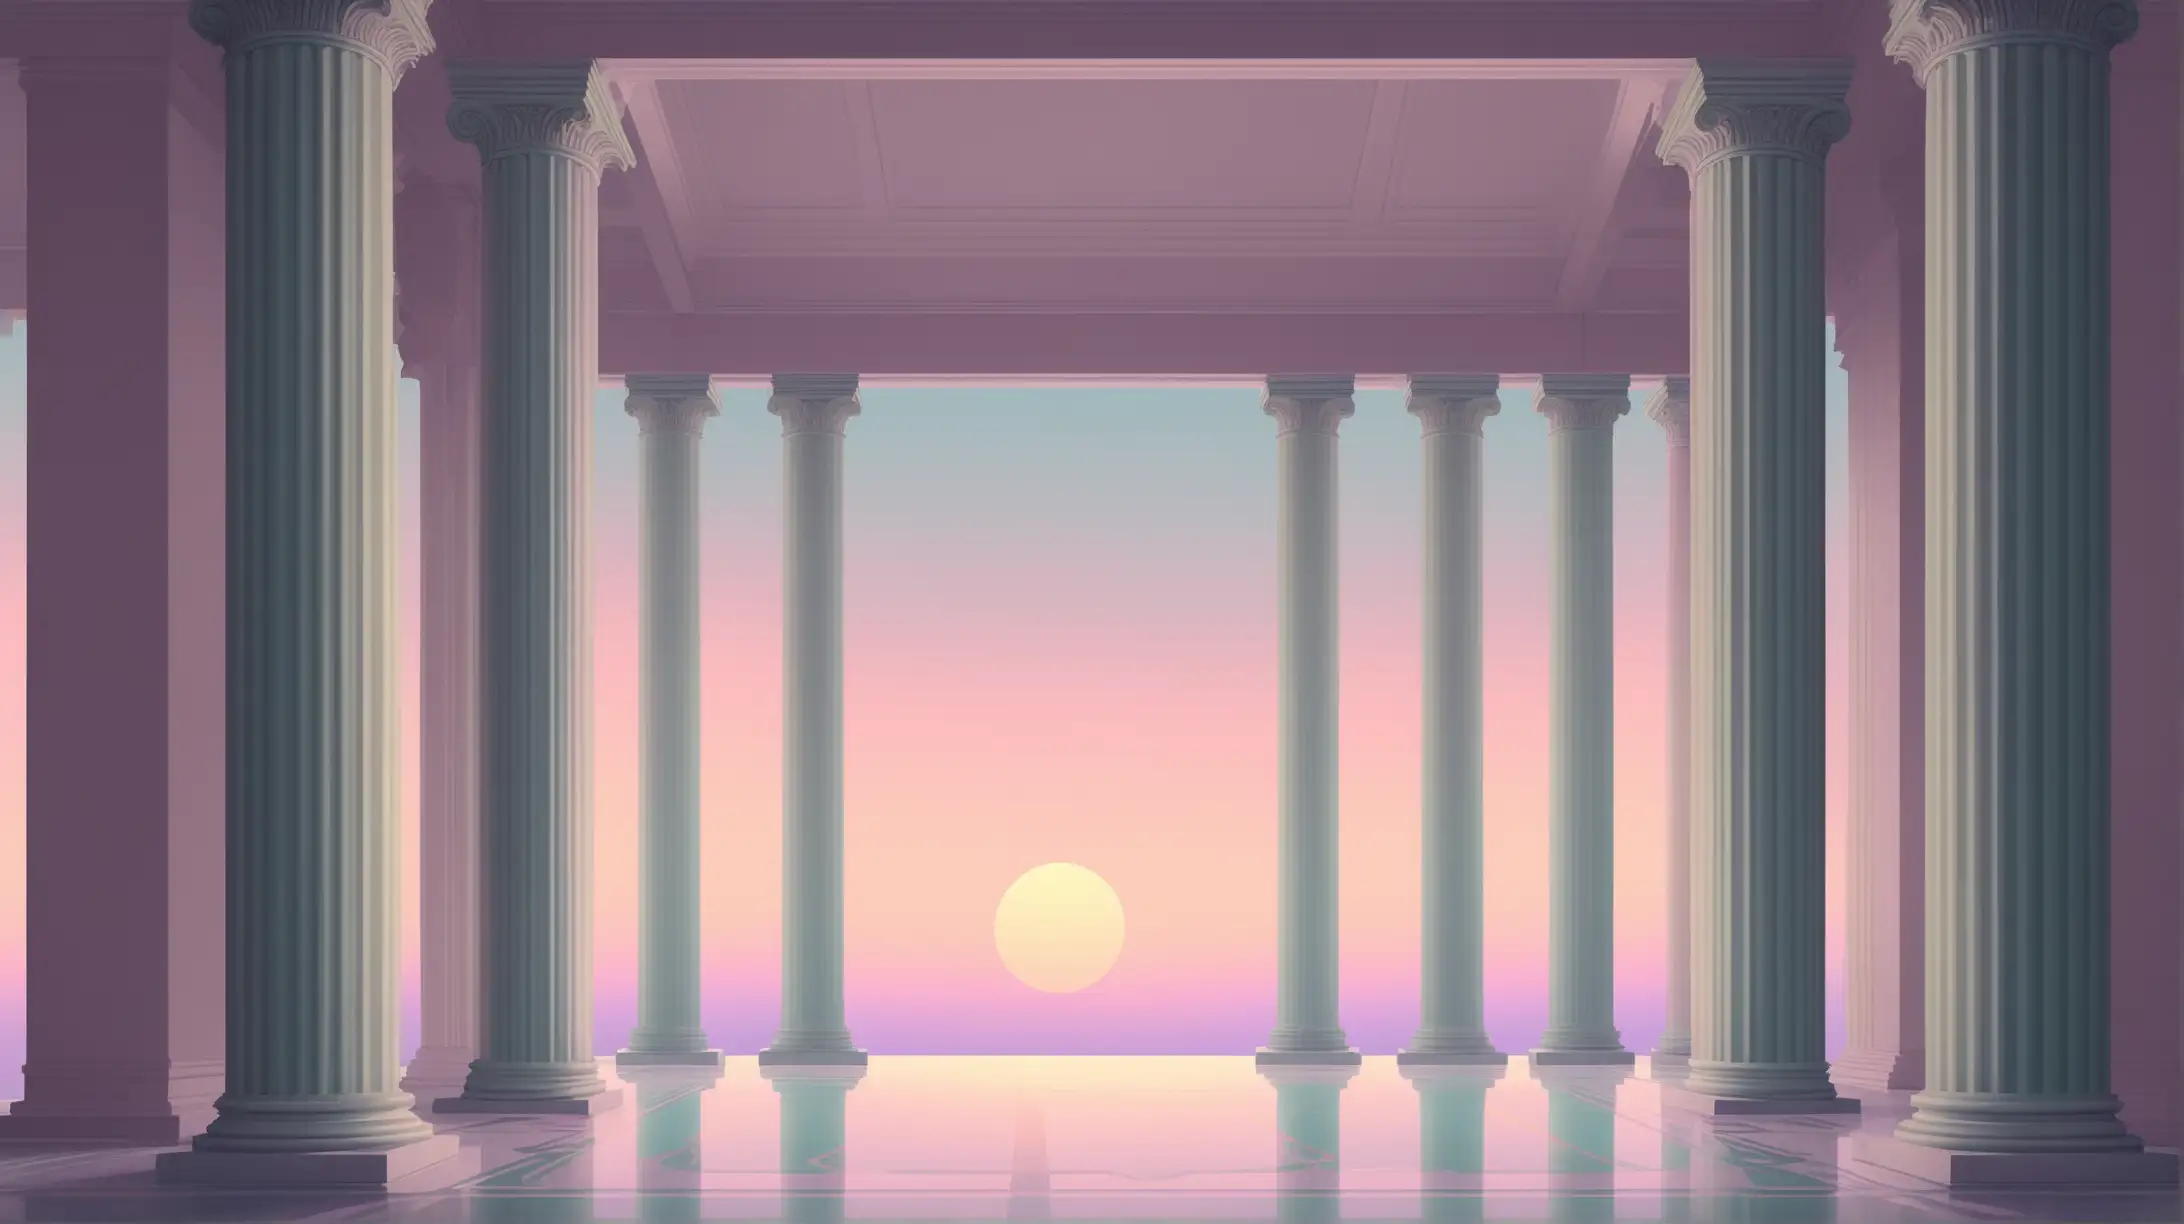 Pillars: The foreground of the image prominently features four classical Greek-style pillars, each crafted with meticulous detail in a minimalist style. The pillars are slim and elegant, with fluted shafts and capitals adorned with subtle geometric patterns.

Color Palette: The pillars are bathed in a palette of vibrant dark pastels. Imagine shades of deep teal, muted lavender, soft coral, and dusky olive green. These colors blend harmoniously, lending a modern twist to the classical architecture.

Background: Behind the pillars, the scene opens up to a serene landscape or an abstract backdrop. Soft gradients of similar pastel hues fill the background, adding depth and contrast to the pillars without overpowering their elegance.

Lighting: Soft, diffused lighting casts gentle highlights and shadows on the pillars, enhancing their texture and form. The light might suggest a peaceful sunrise or sunset ambiance, creating a tranquil and contemplative atmosphere.

Composition: The composition is balanced and symmetrical, with the pillars positioned equidistantly from each other. This symmetry reinforces the classical aesthetic while the contemporary color palette gives the scene a fresh and modern feel.